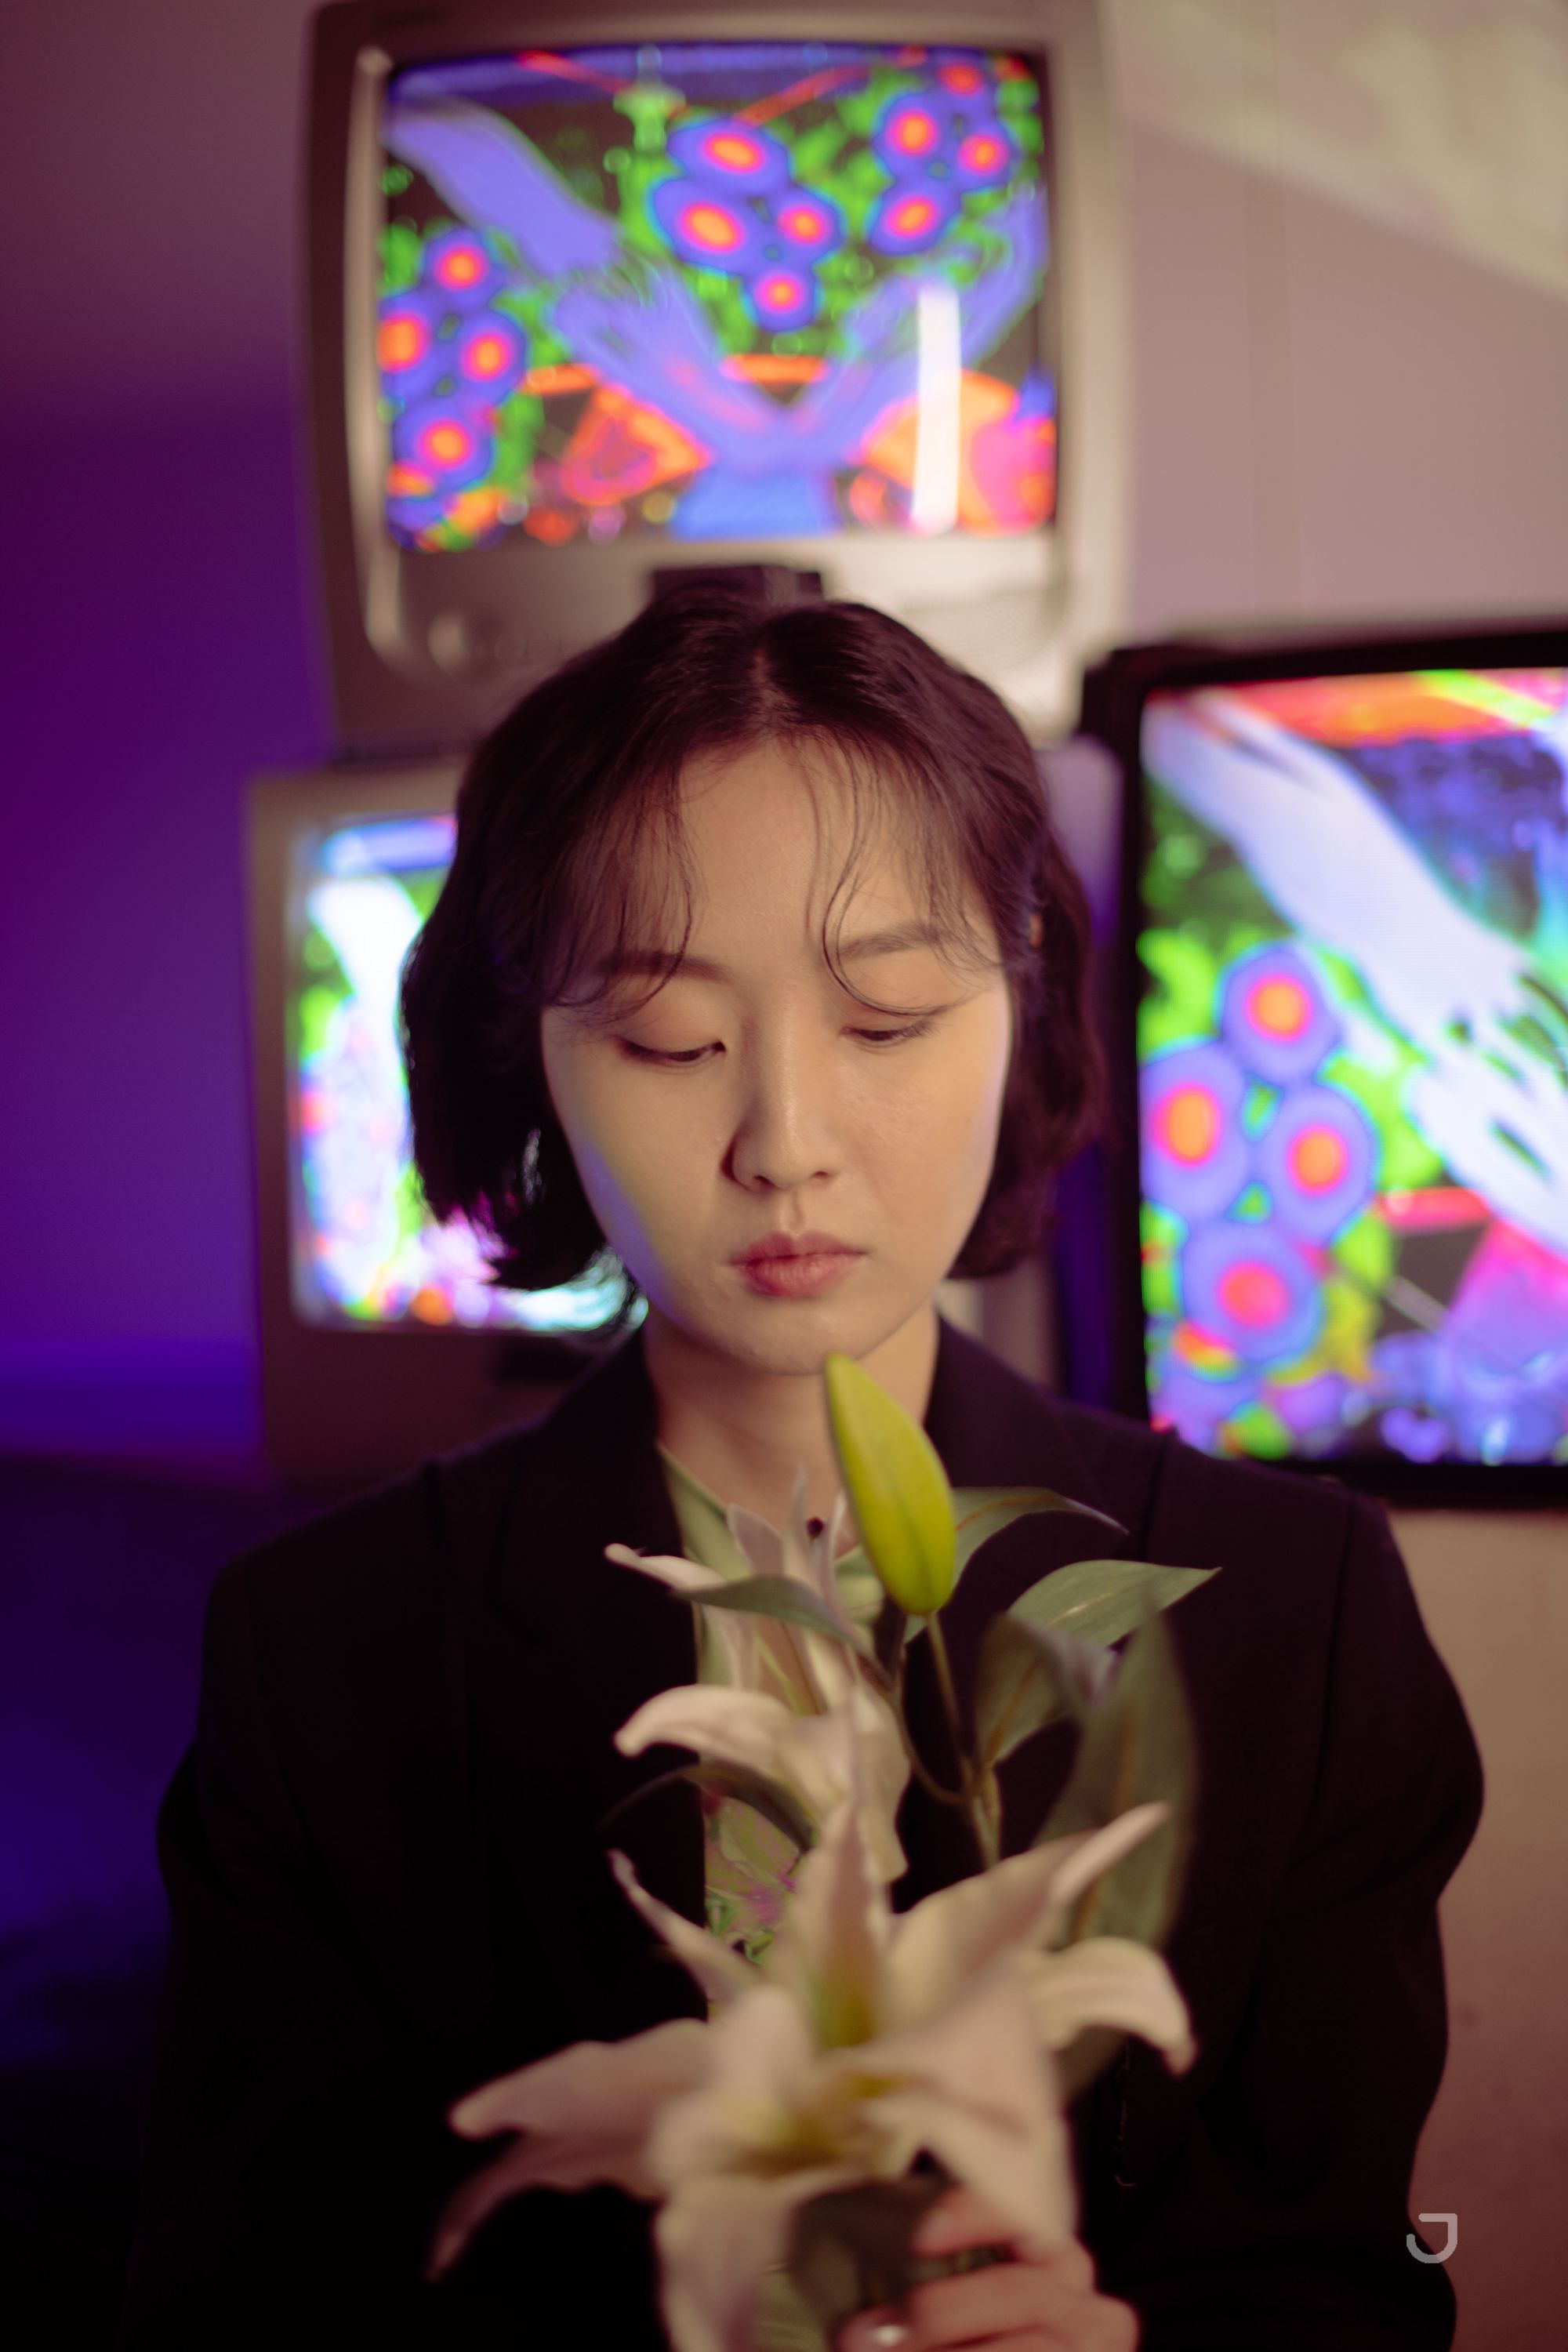 Artist Ram Han with flowers in front of retro TVs with her work on them